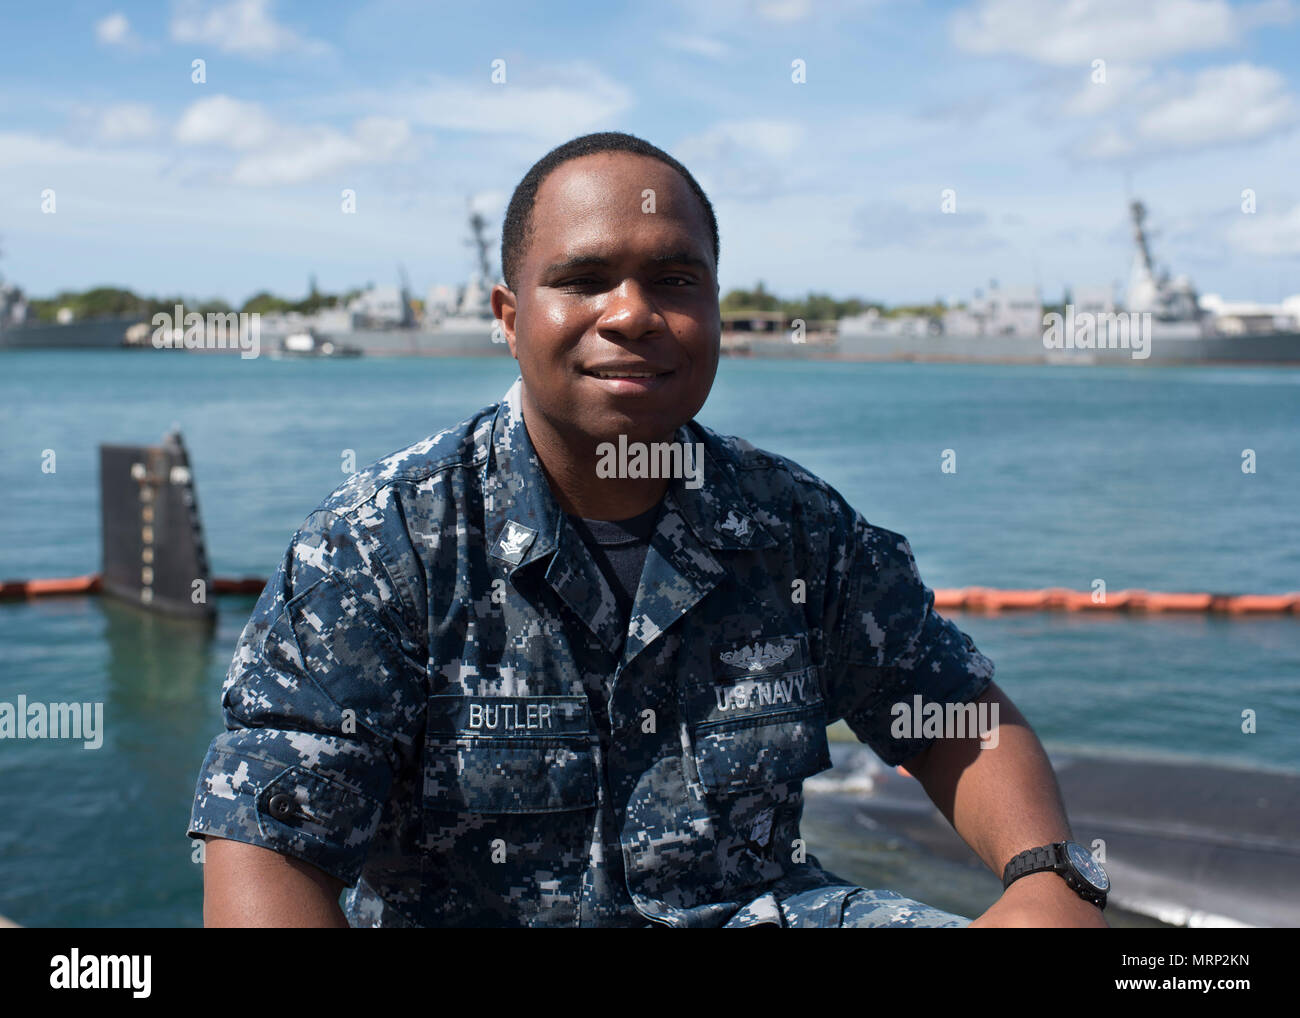 I joined the Navy to travel the world and see something besides my  hometown. I became a culinary specialist because I like to cook and had  some previous experience doing it. I